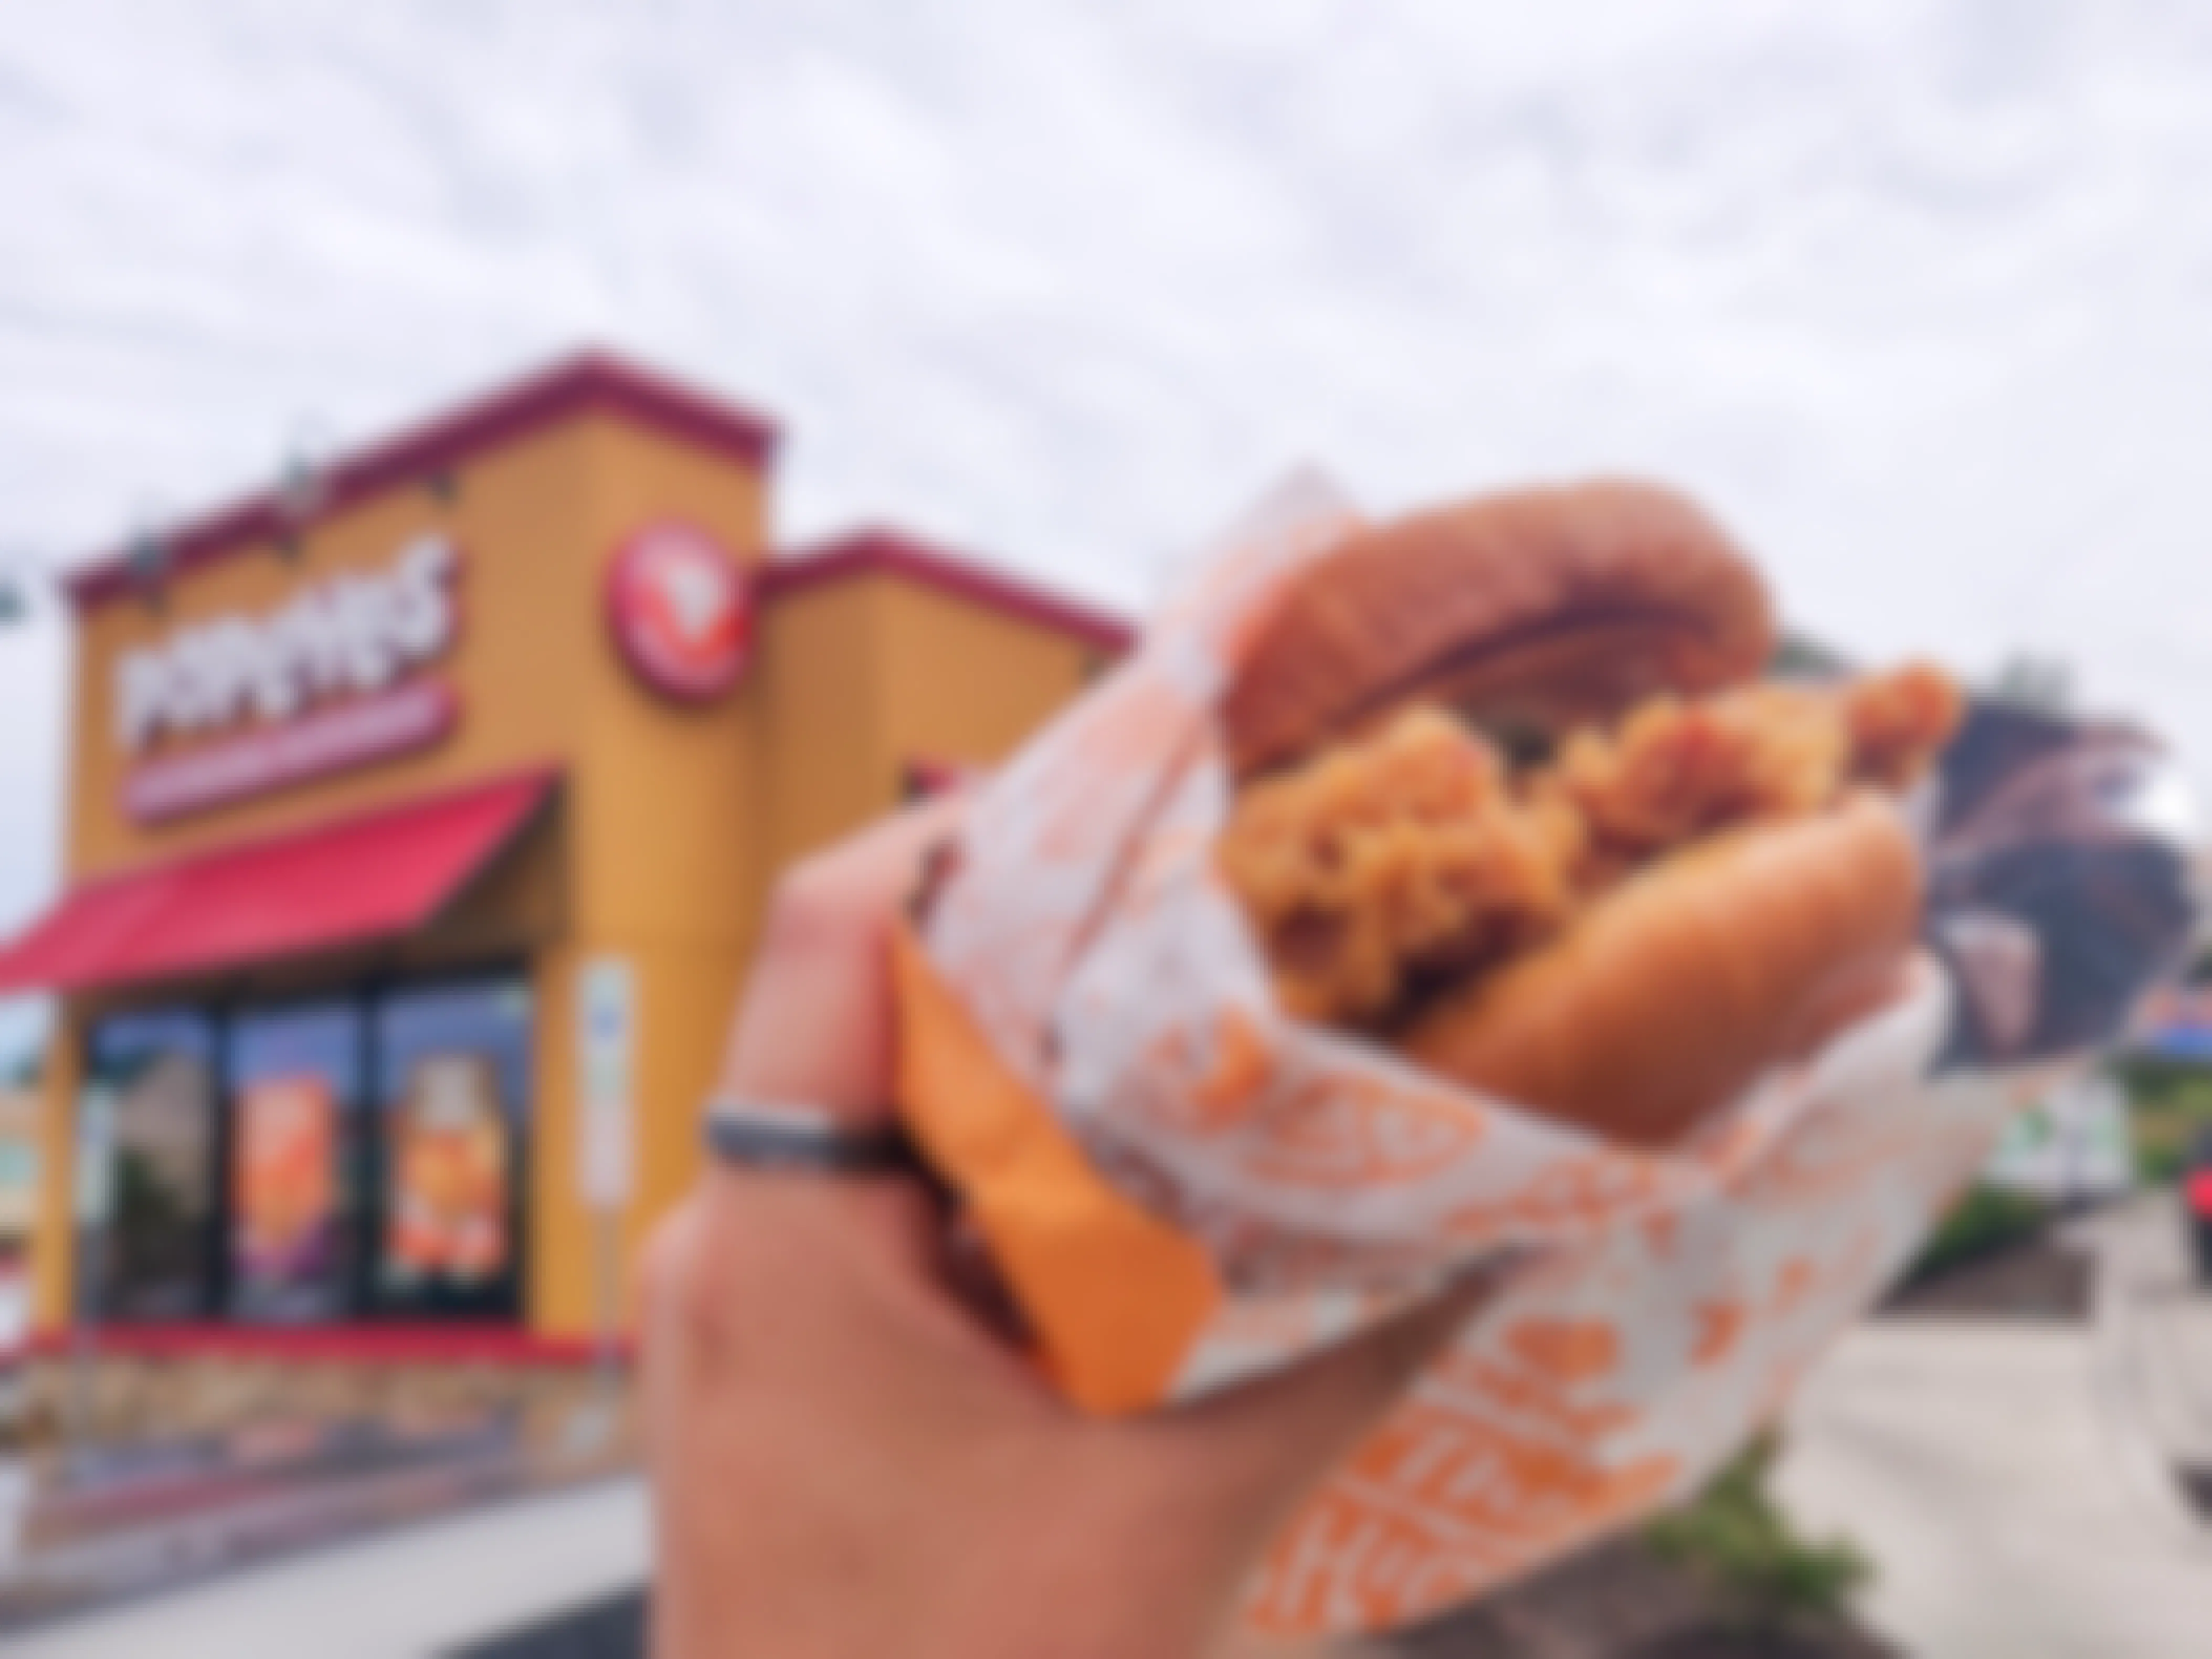 A person's hand holding a Popeyes chicken sandwich with a Popeyes restaurant in the background.